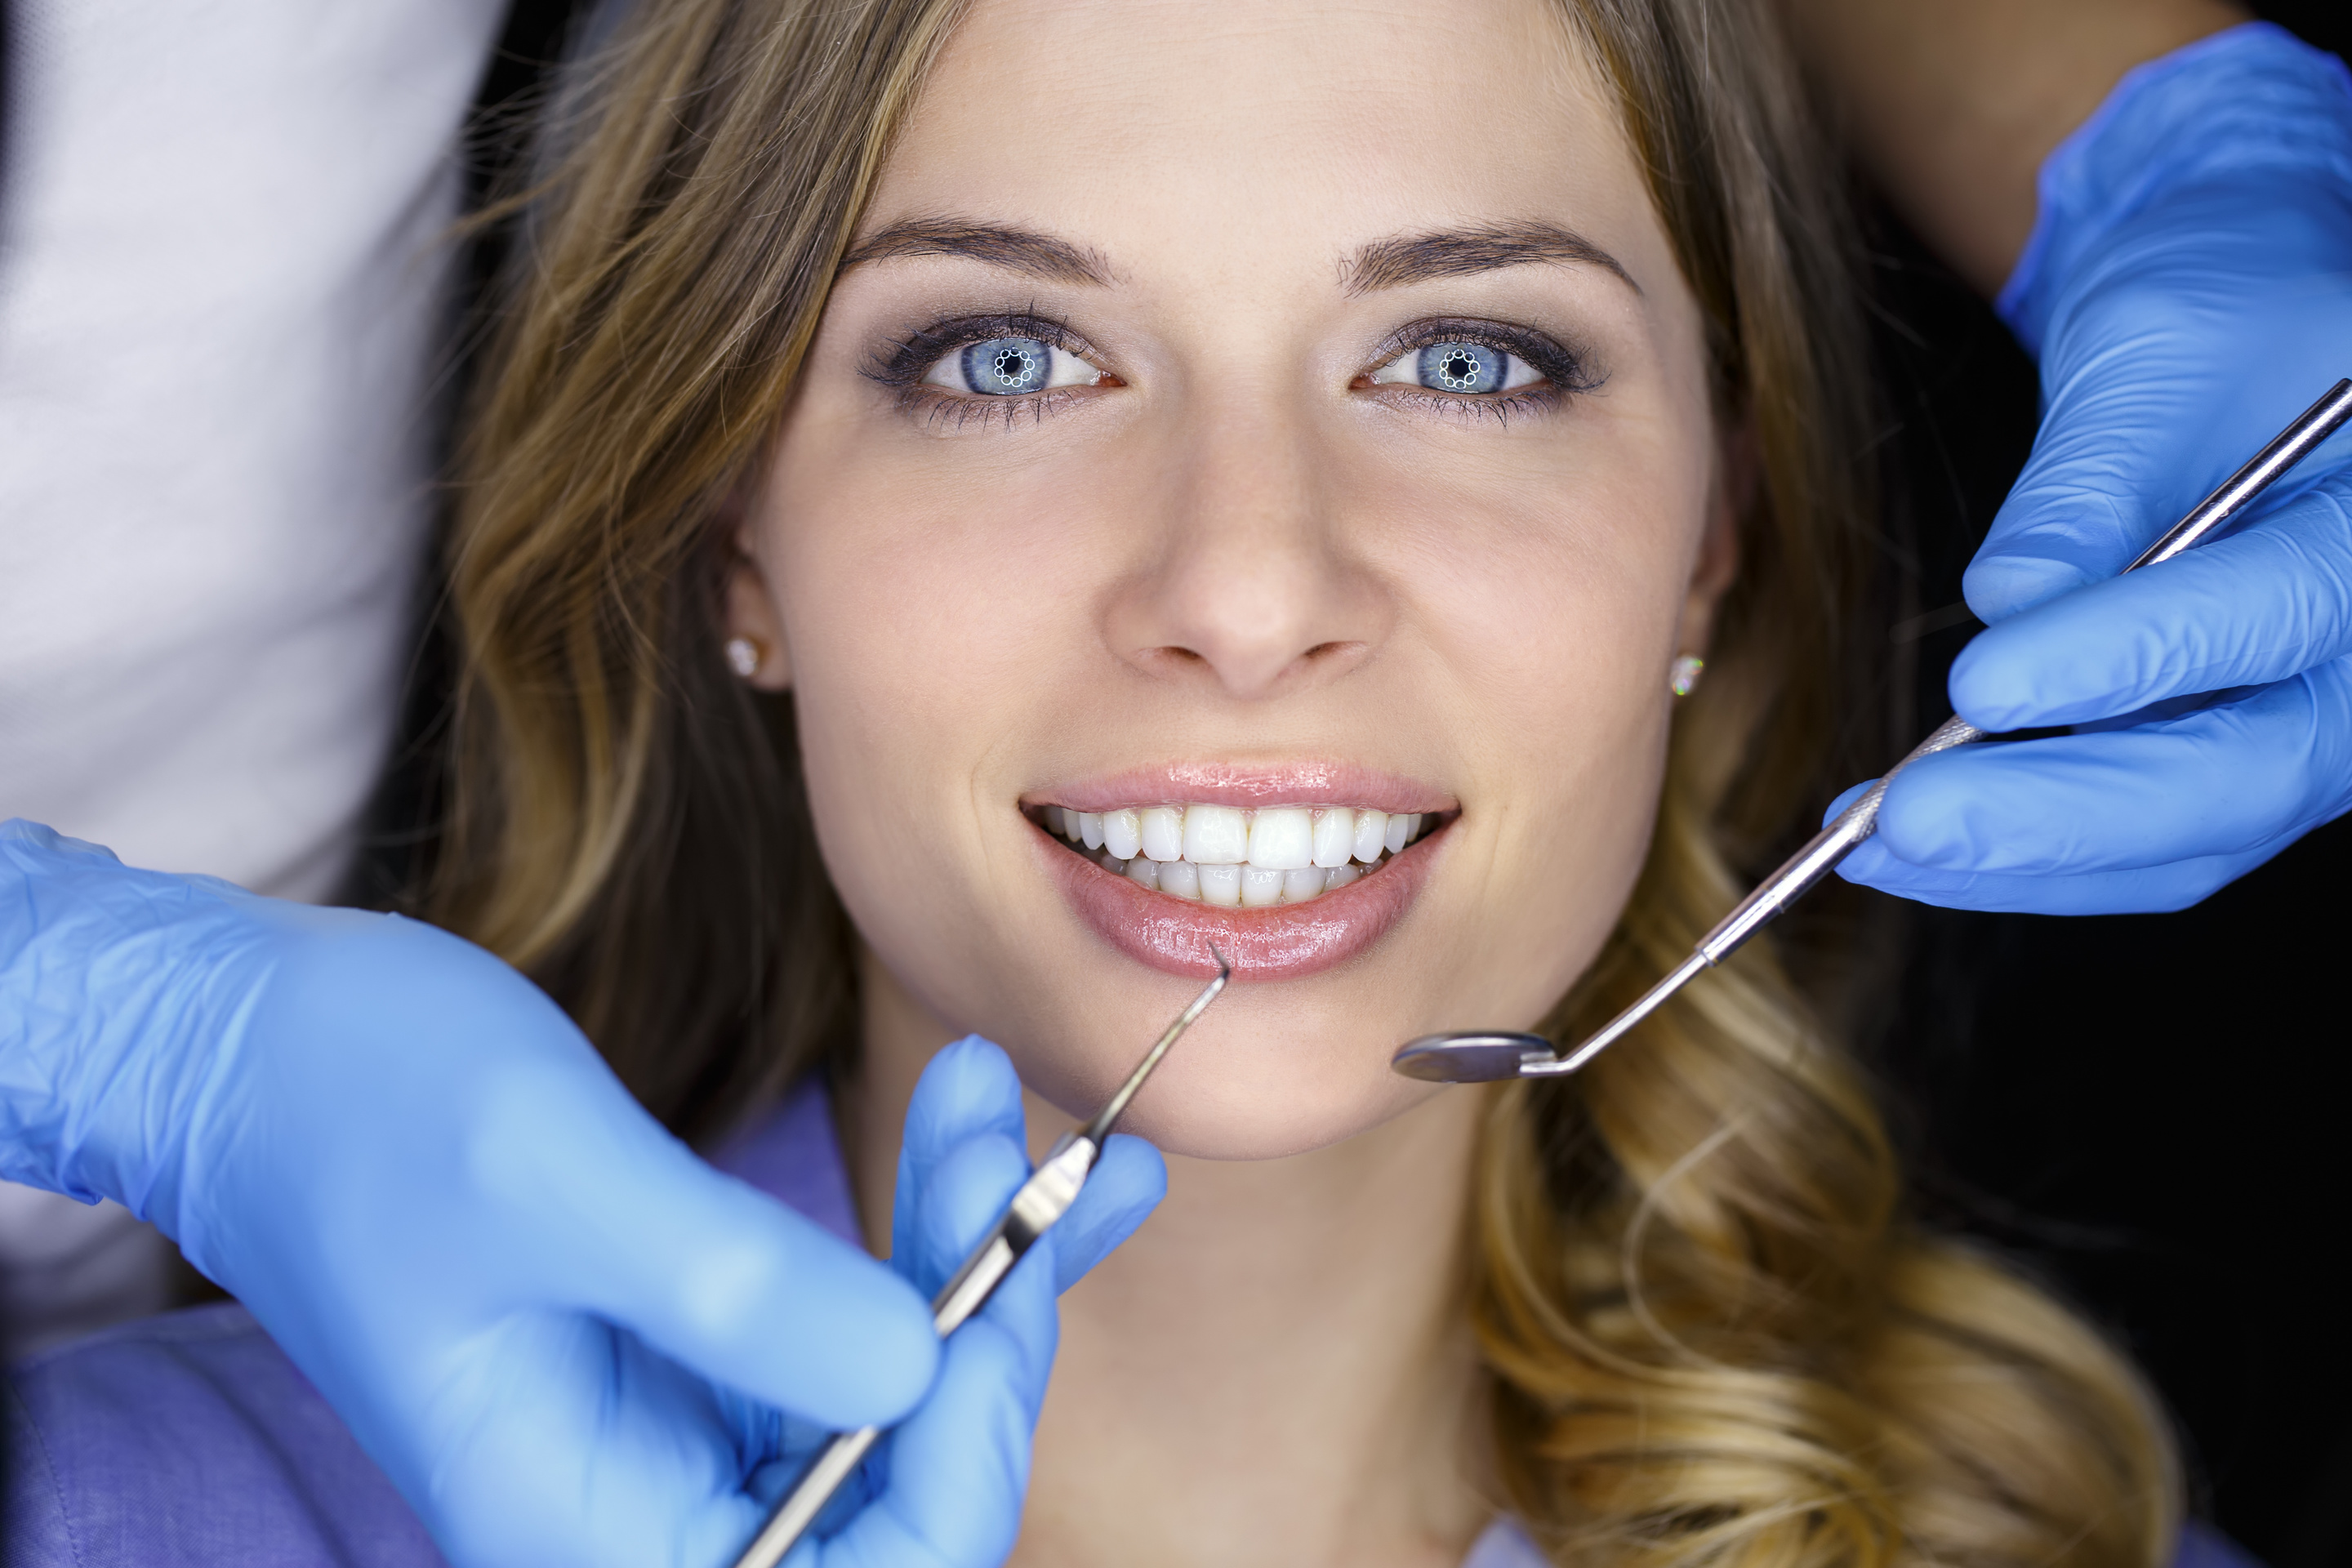 Where can I find Pasadena root canal therapy?